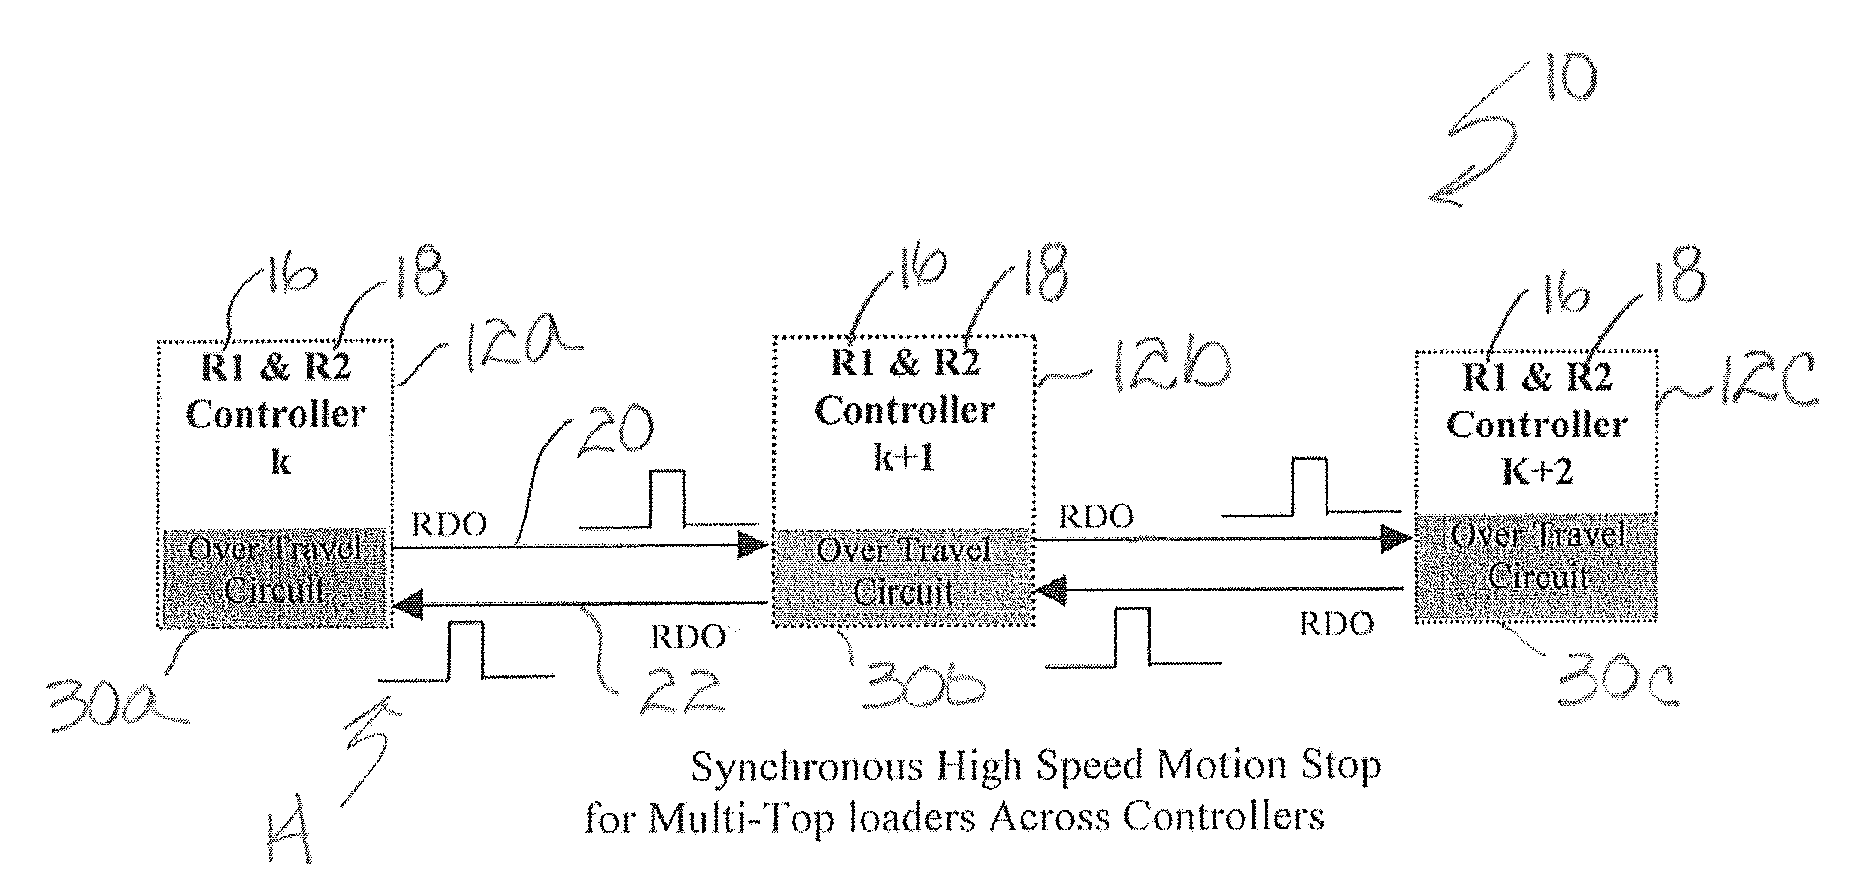 Control method for synchronous high speed motion stop for multi-top loaders across controllers